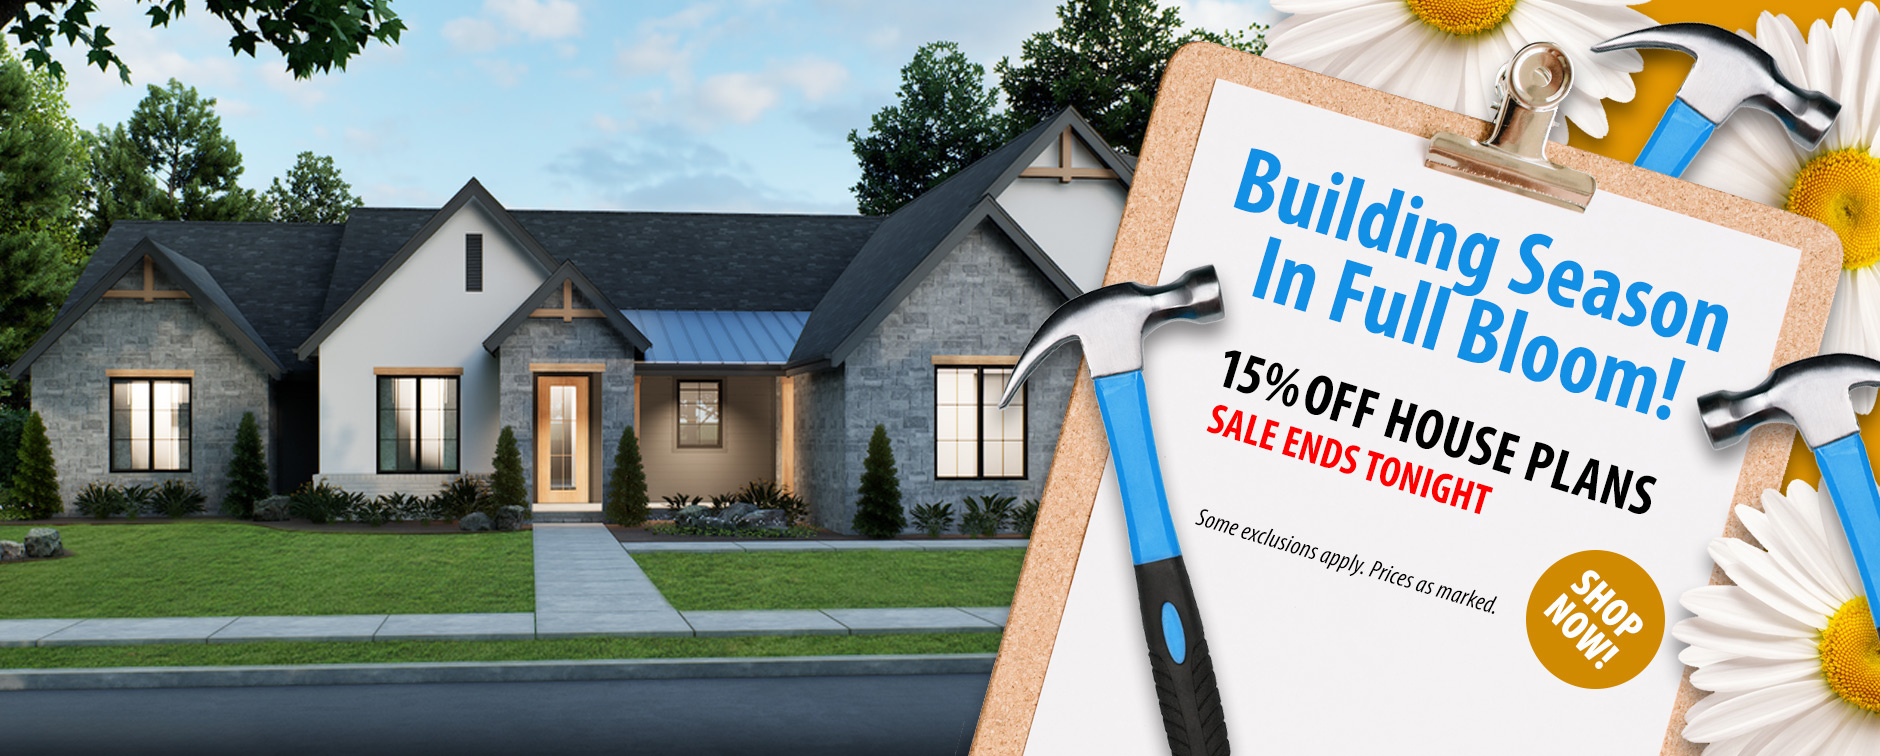 Shop the Spring Planning Event and Get 15% Off House Plans - Offer Ends Tonight